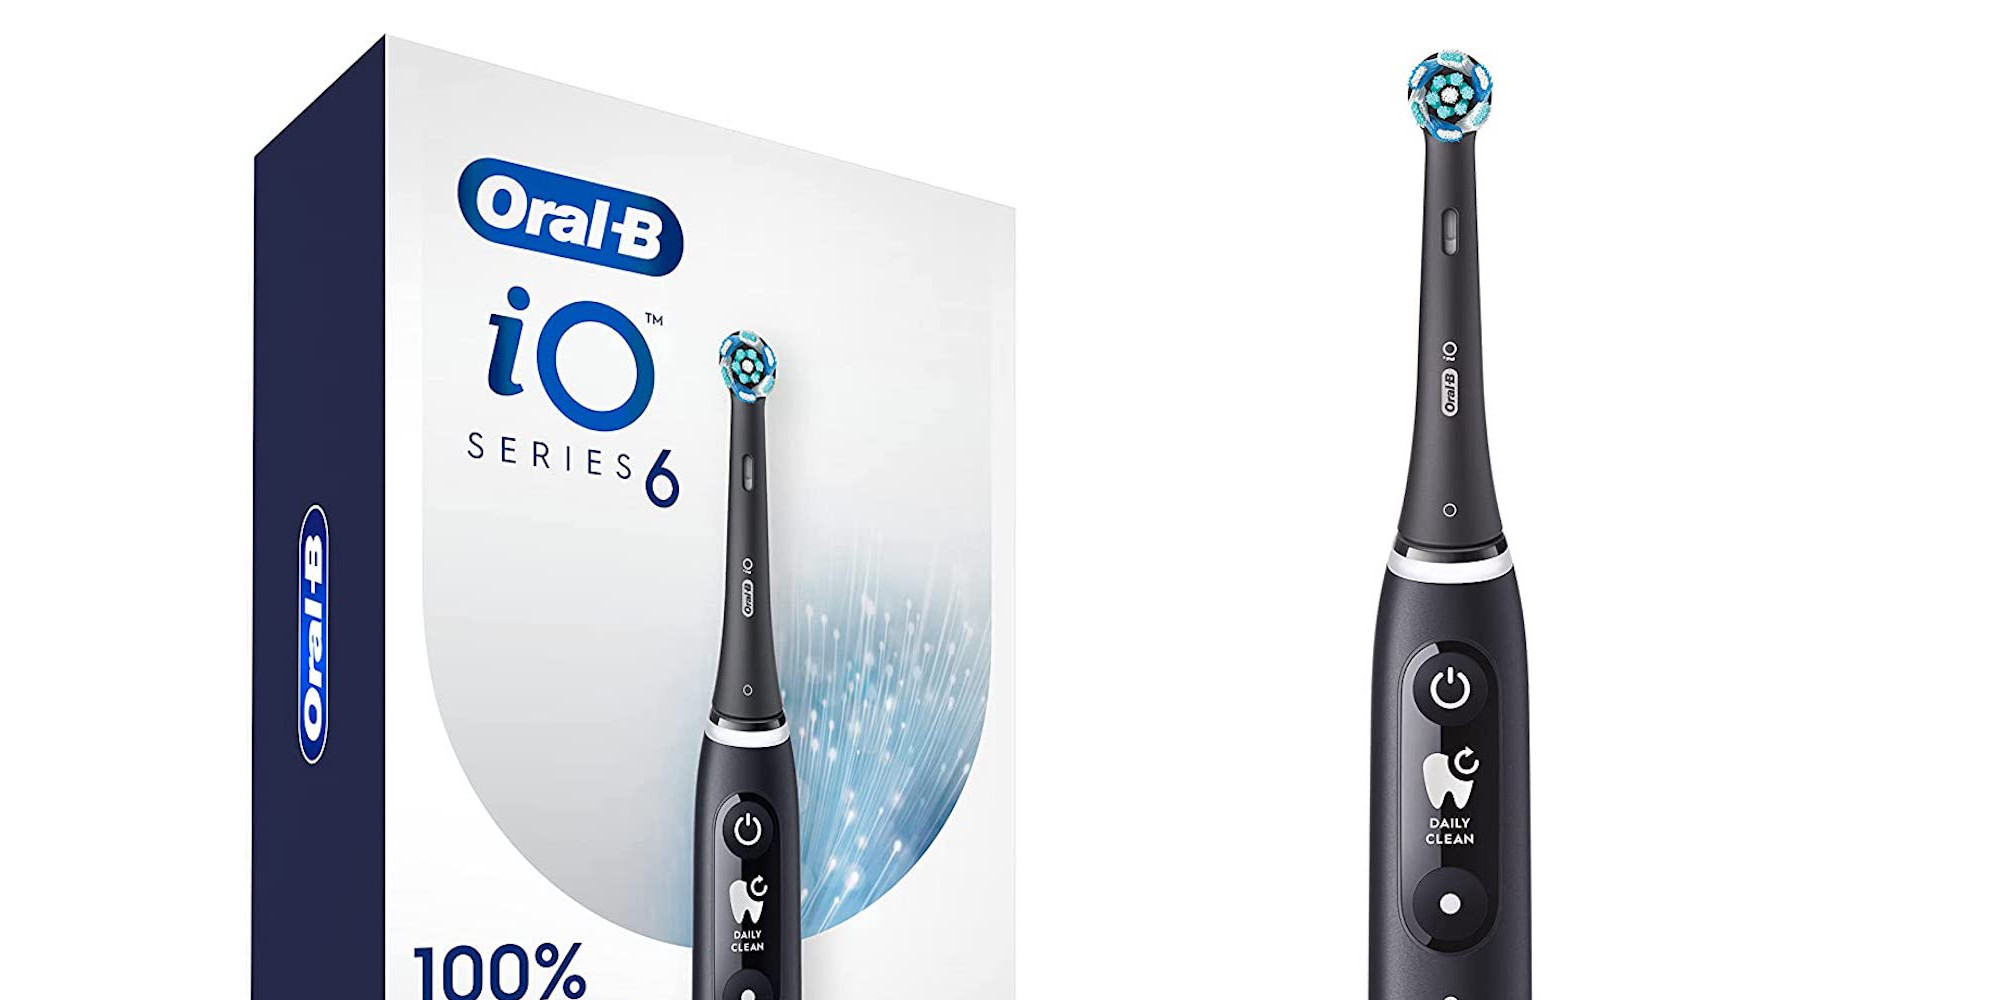 kunstmest Dosering huilen Oral-B/Crest deals deliver new lows up to 50% off: Toothbrushes, teeth  whitening from $12